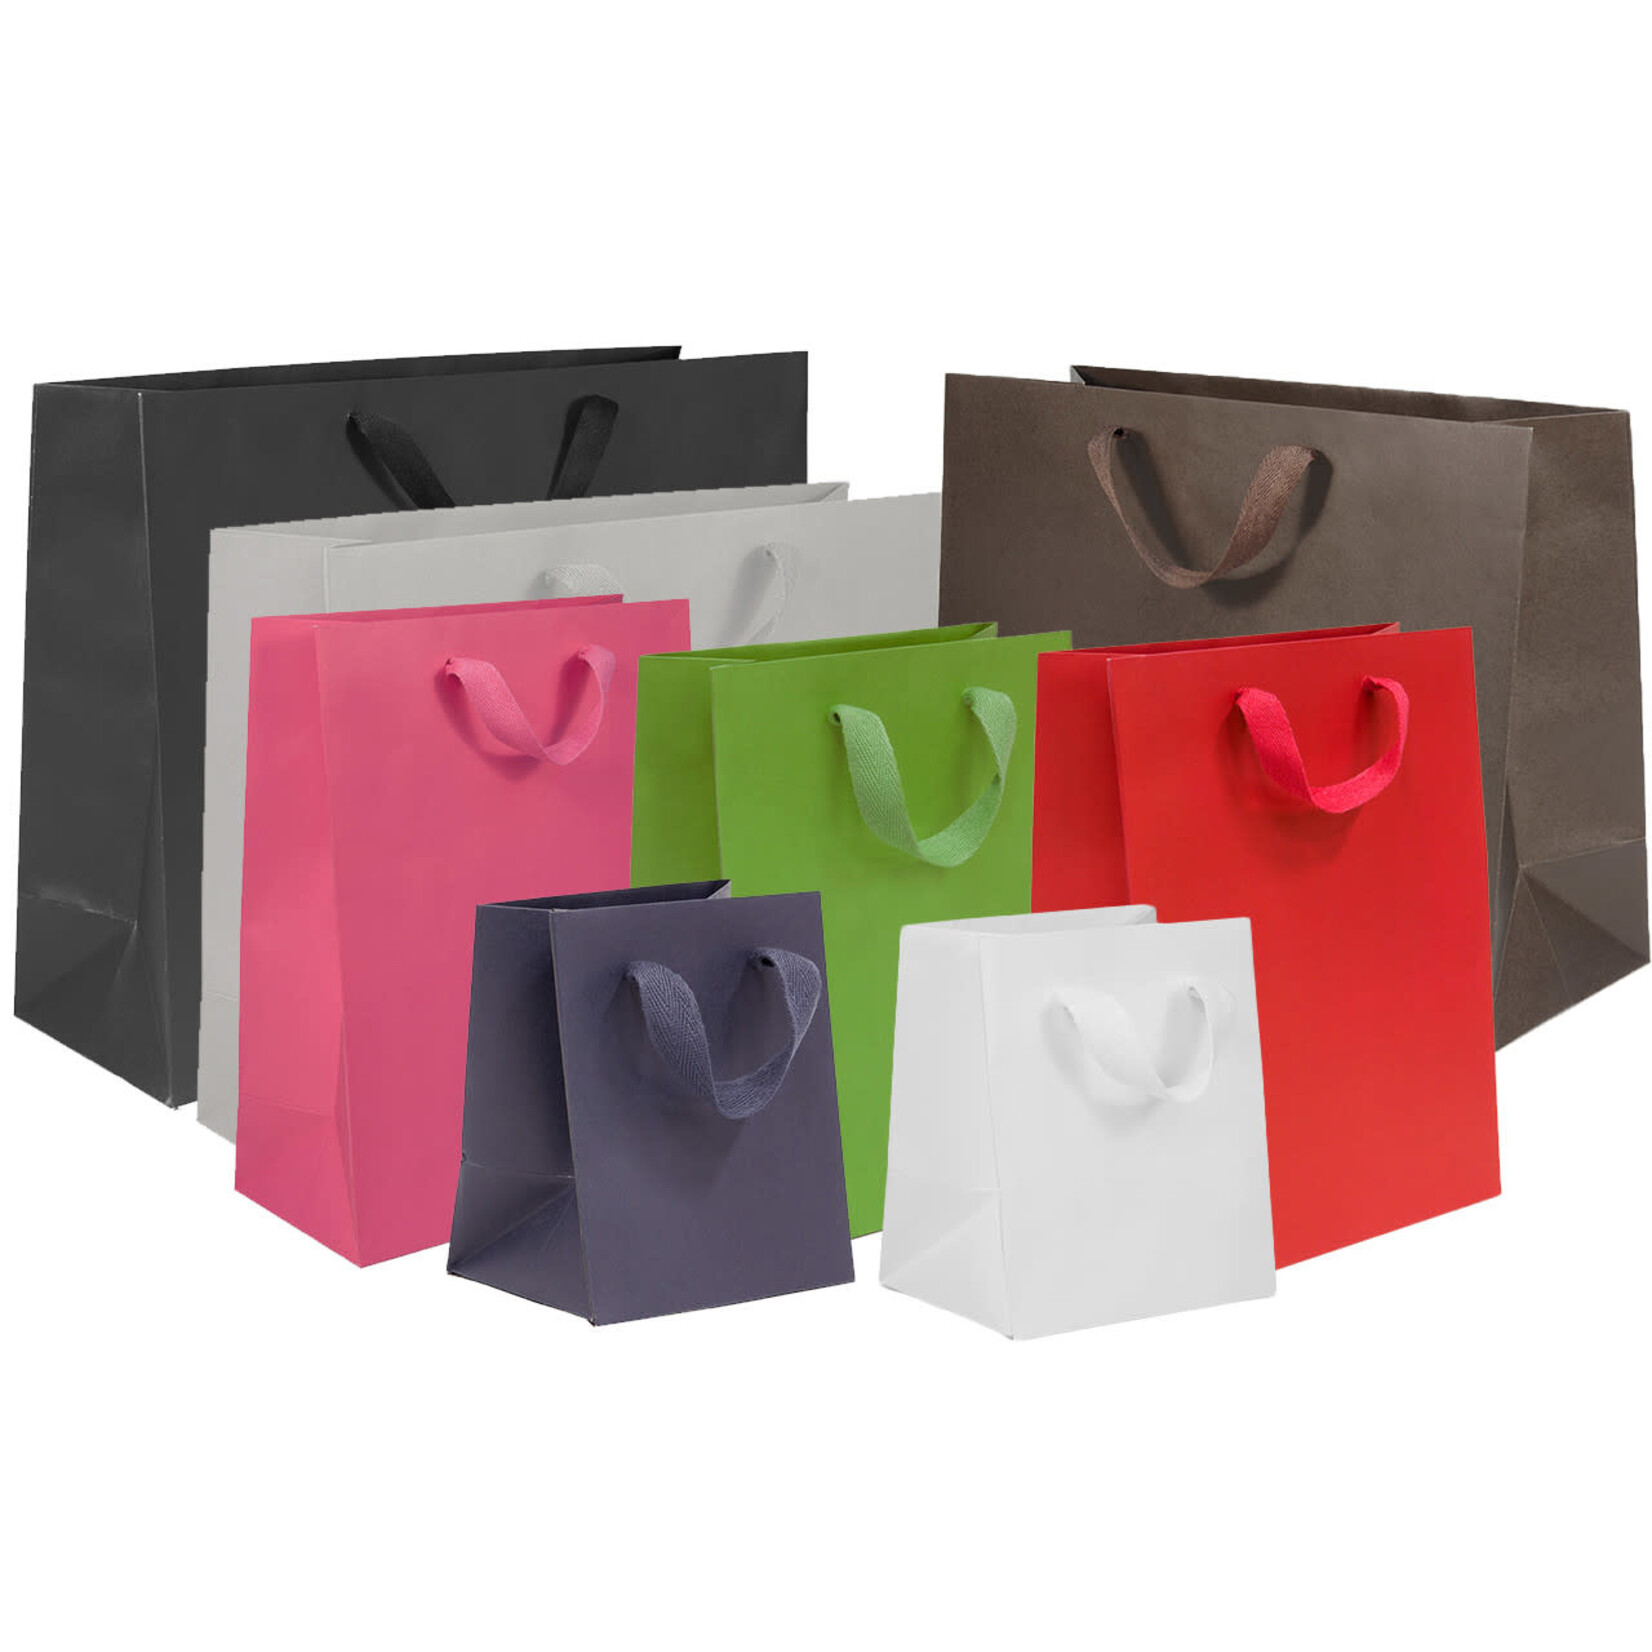 SMALL SURPRISE GIFT BAGS FOR HER